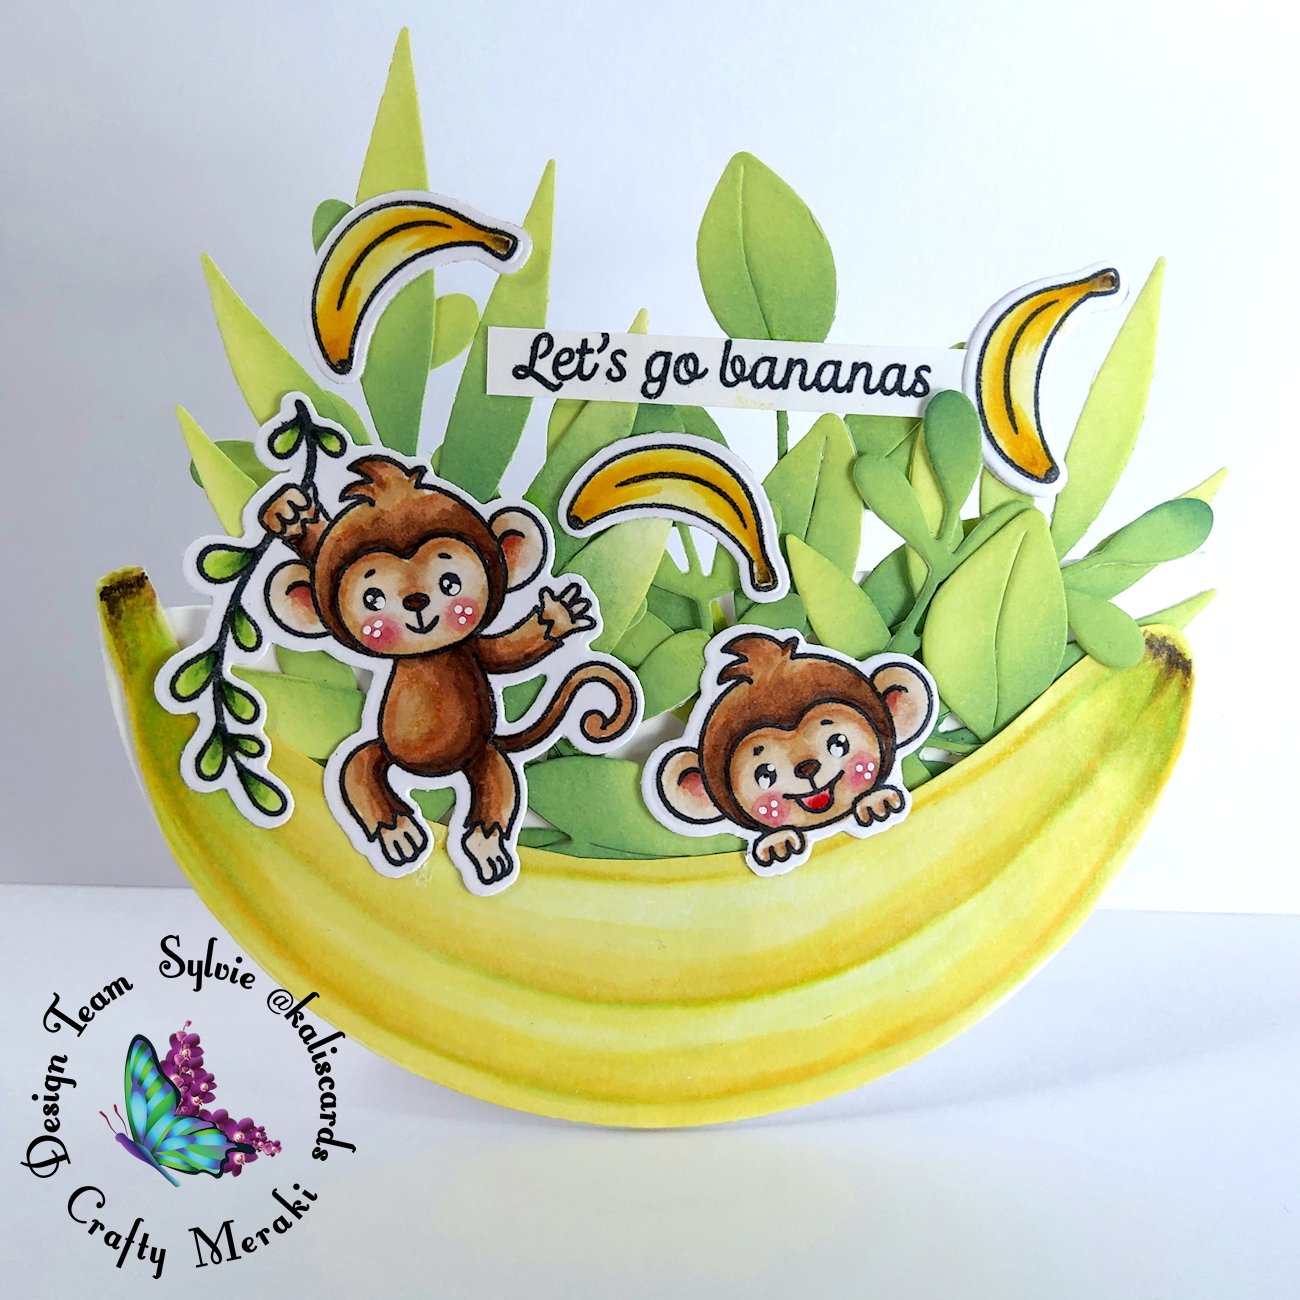 Let's go bananas by Sylvie @Kaliscards